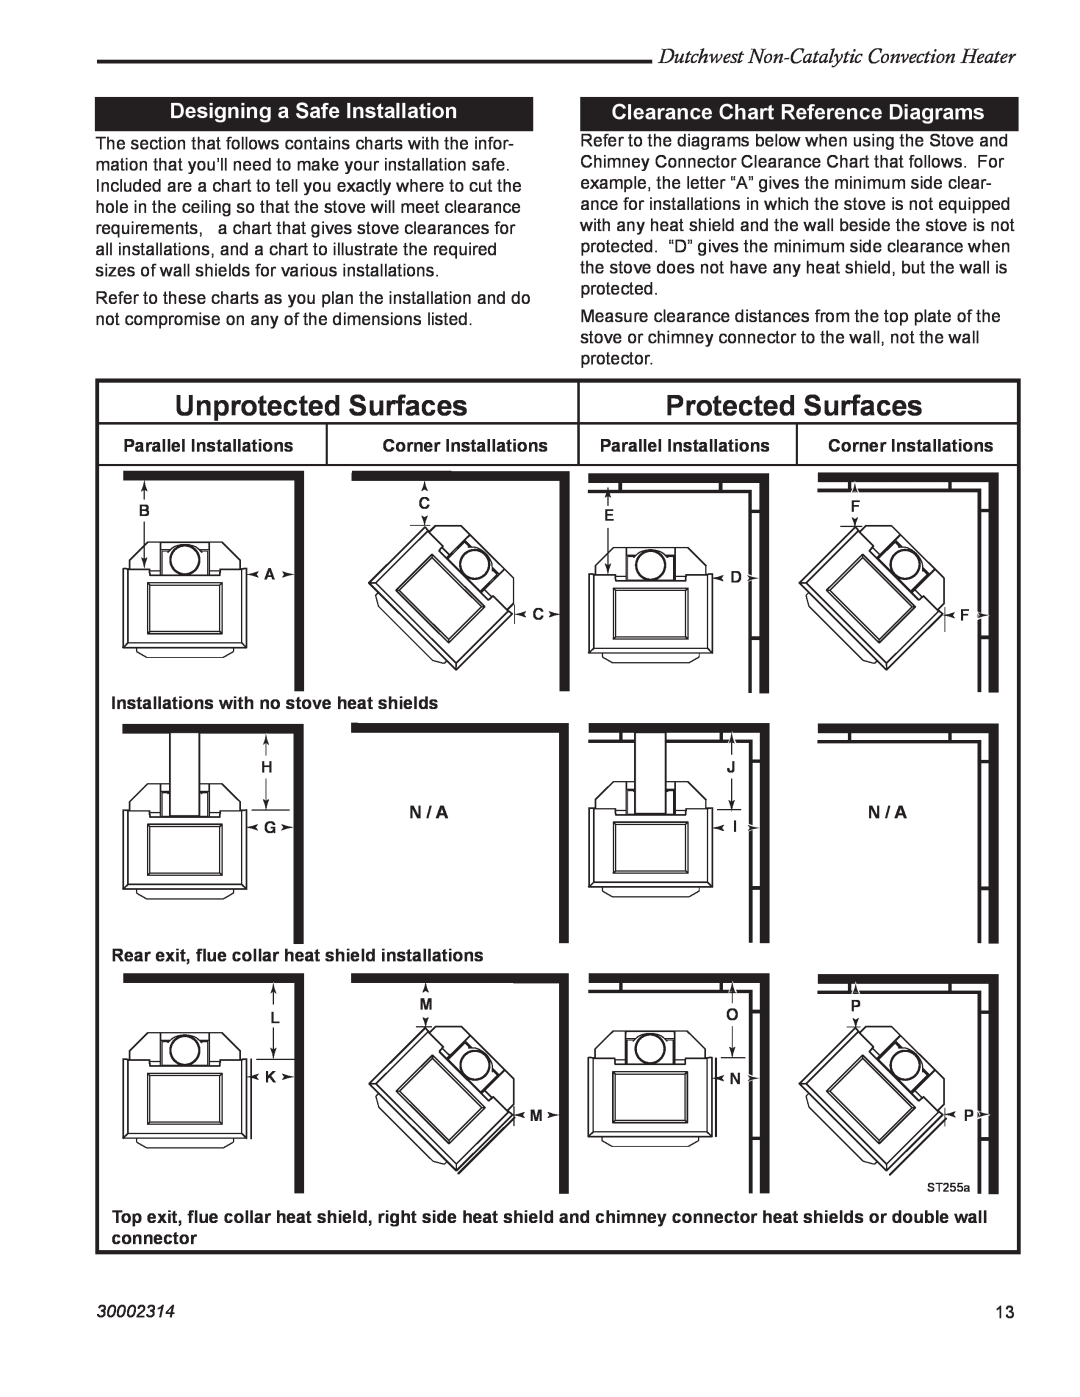 Vermont Casting 2477 Designing a Safe Installation, Clearance Chart Reference Diagrams, Unprotected Surfaces, 30002314 